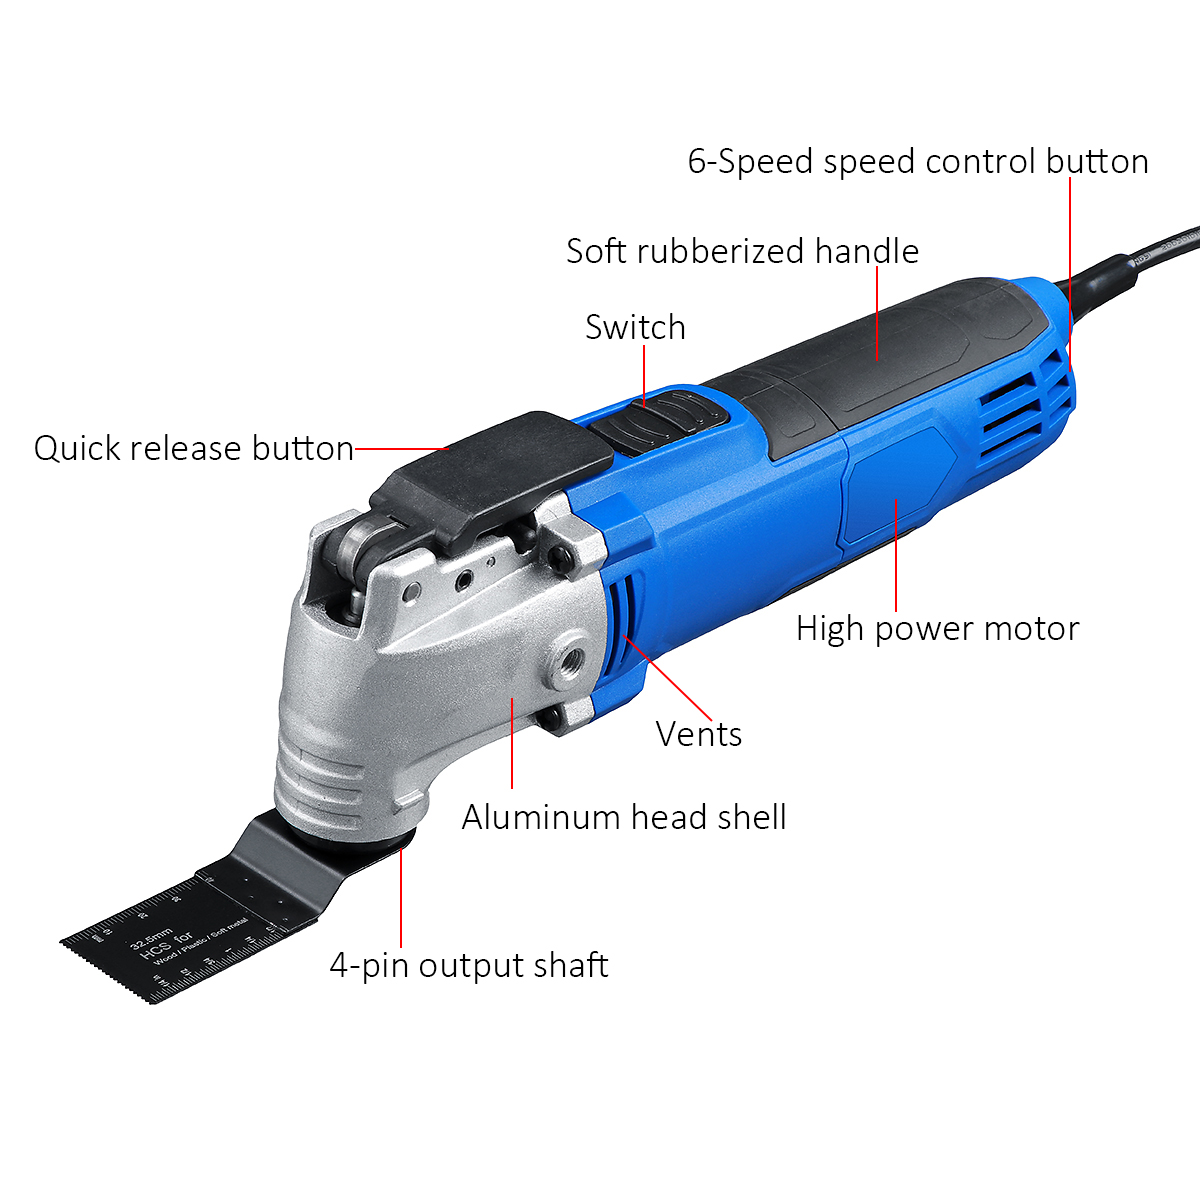 220V-Electric-Polisher-Cutter-Trimmer-Electric-Saw-Renovator-Tool-Woodworking-Oscillating-Tool-1800975-16